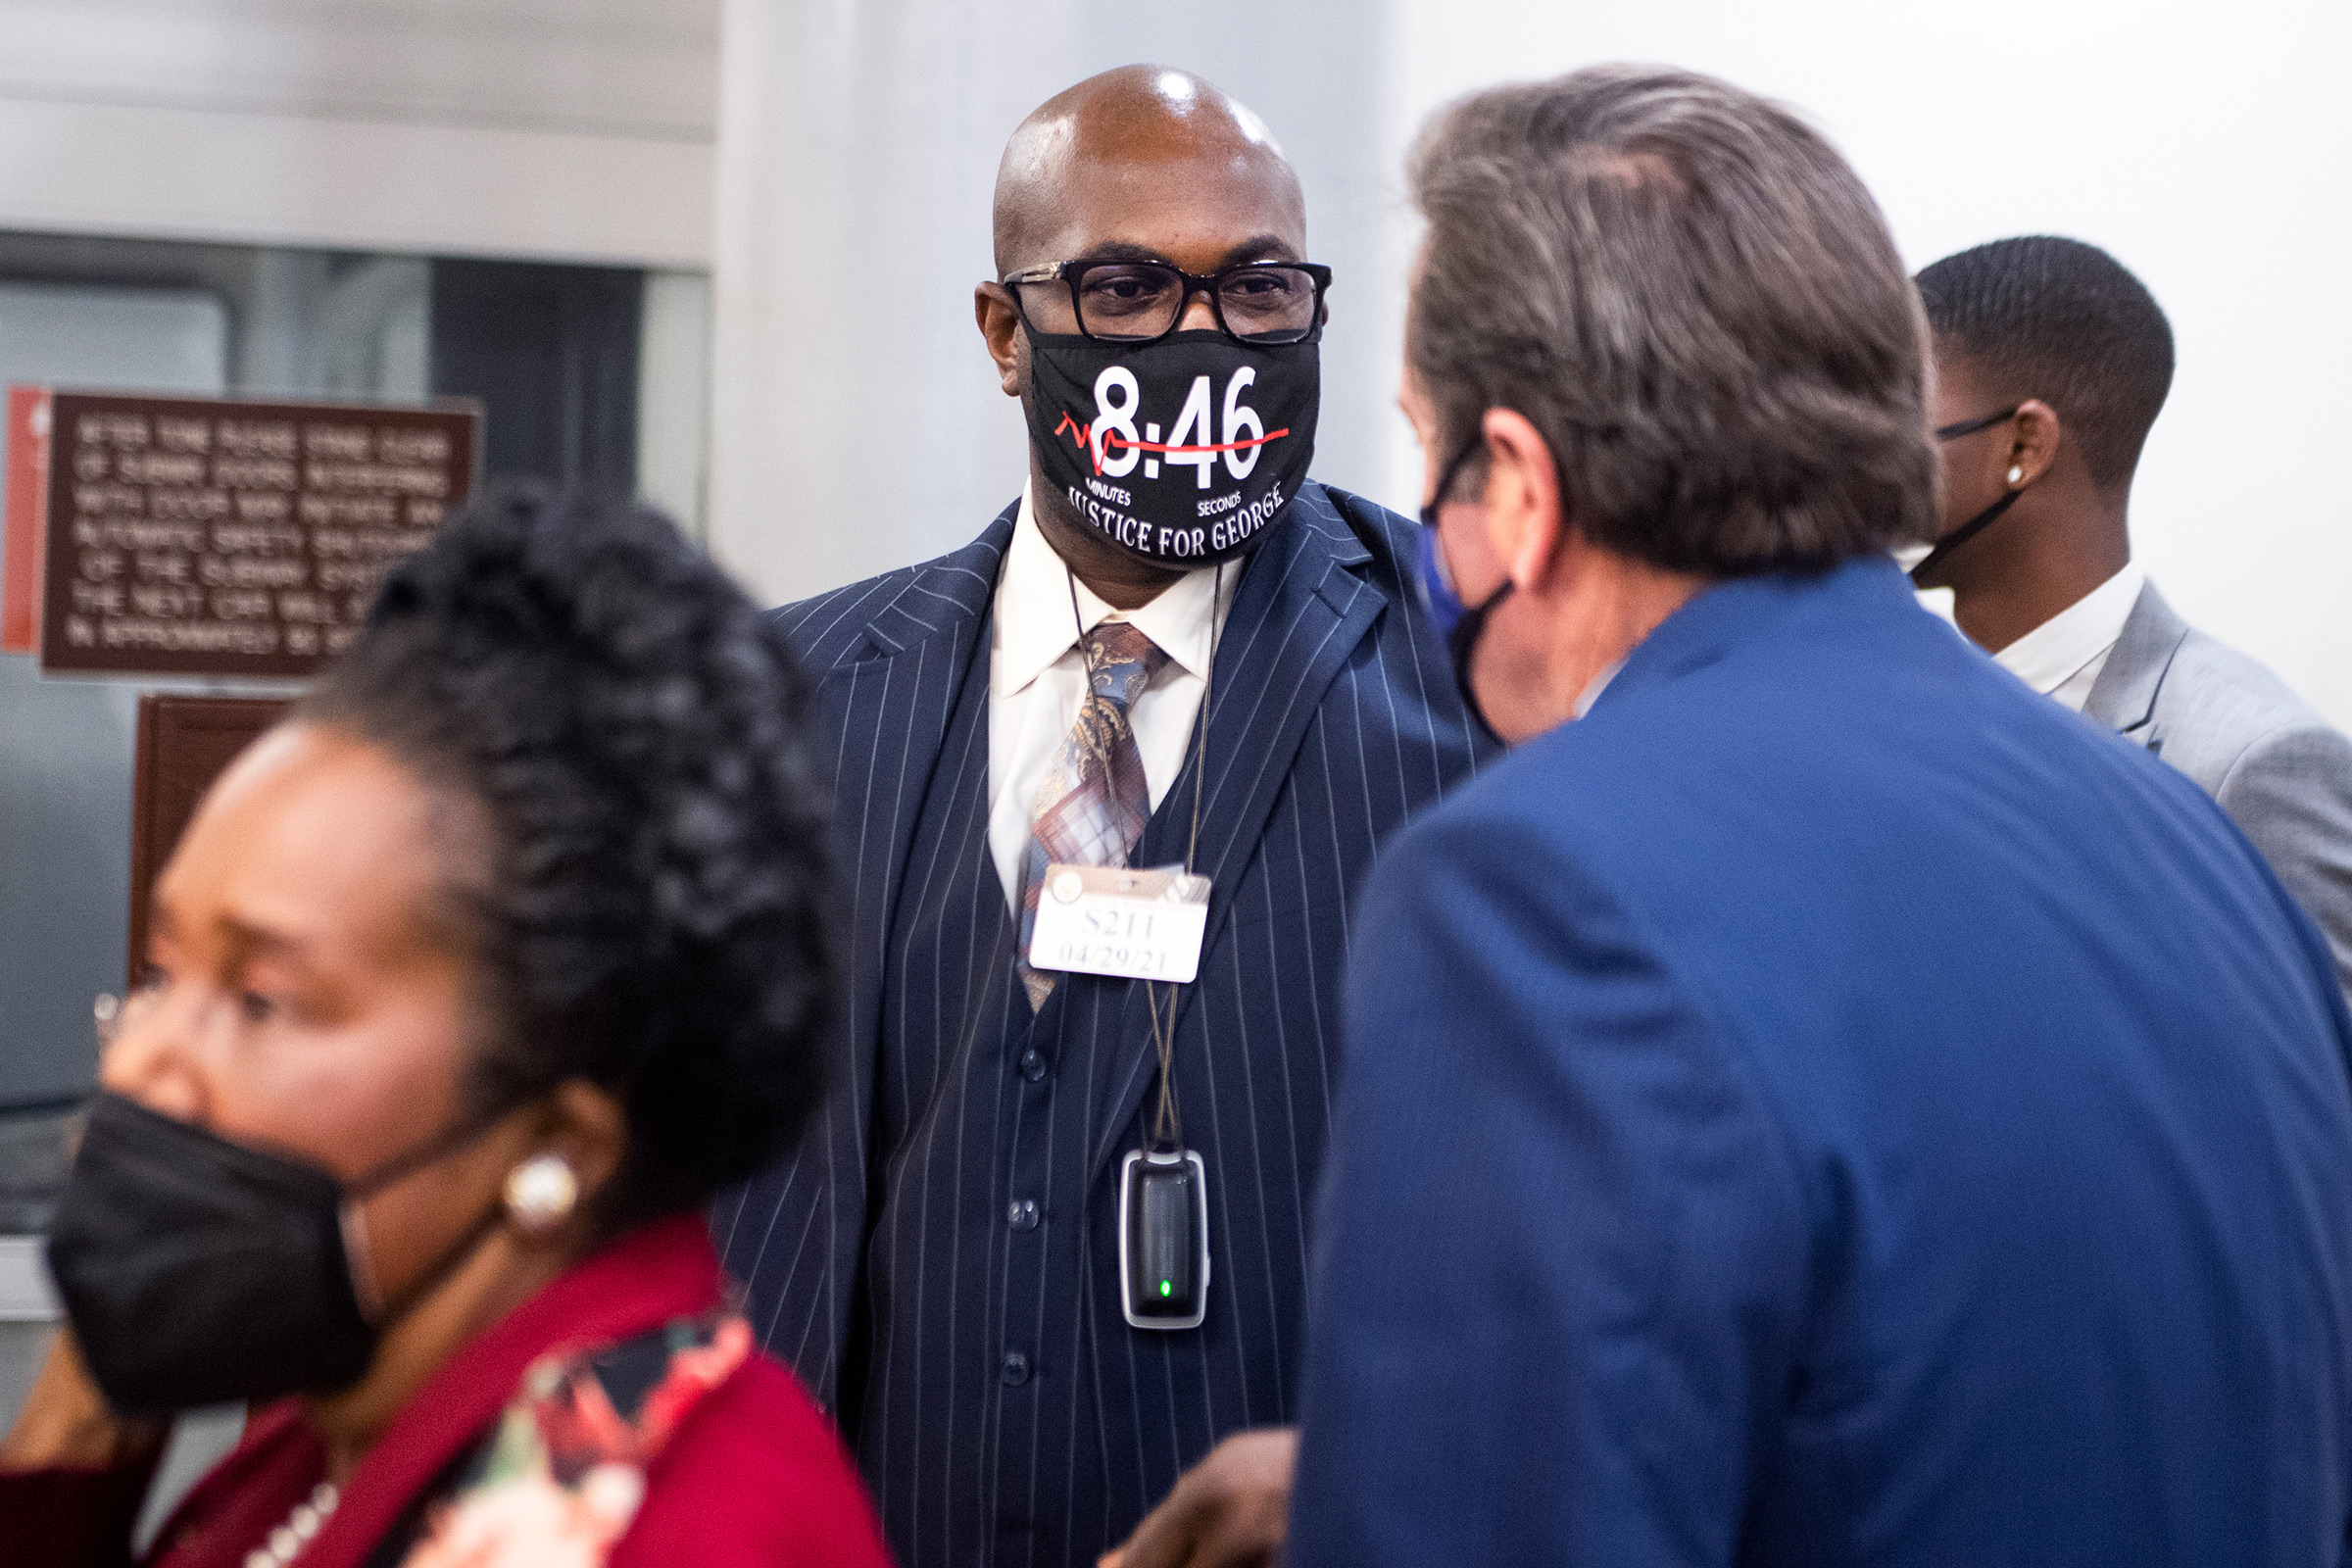 Philonise Floyd, center, the brother of George Floyd, talks with Rep. John Garamendi, D-Calif., while visiting Capitol Hill to discuss the George Floyd Justice in Policing Act, in Washington, D.C., on April 29, 2021.